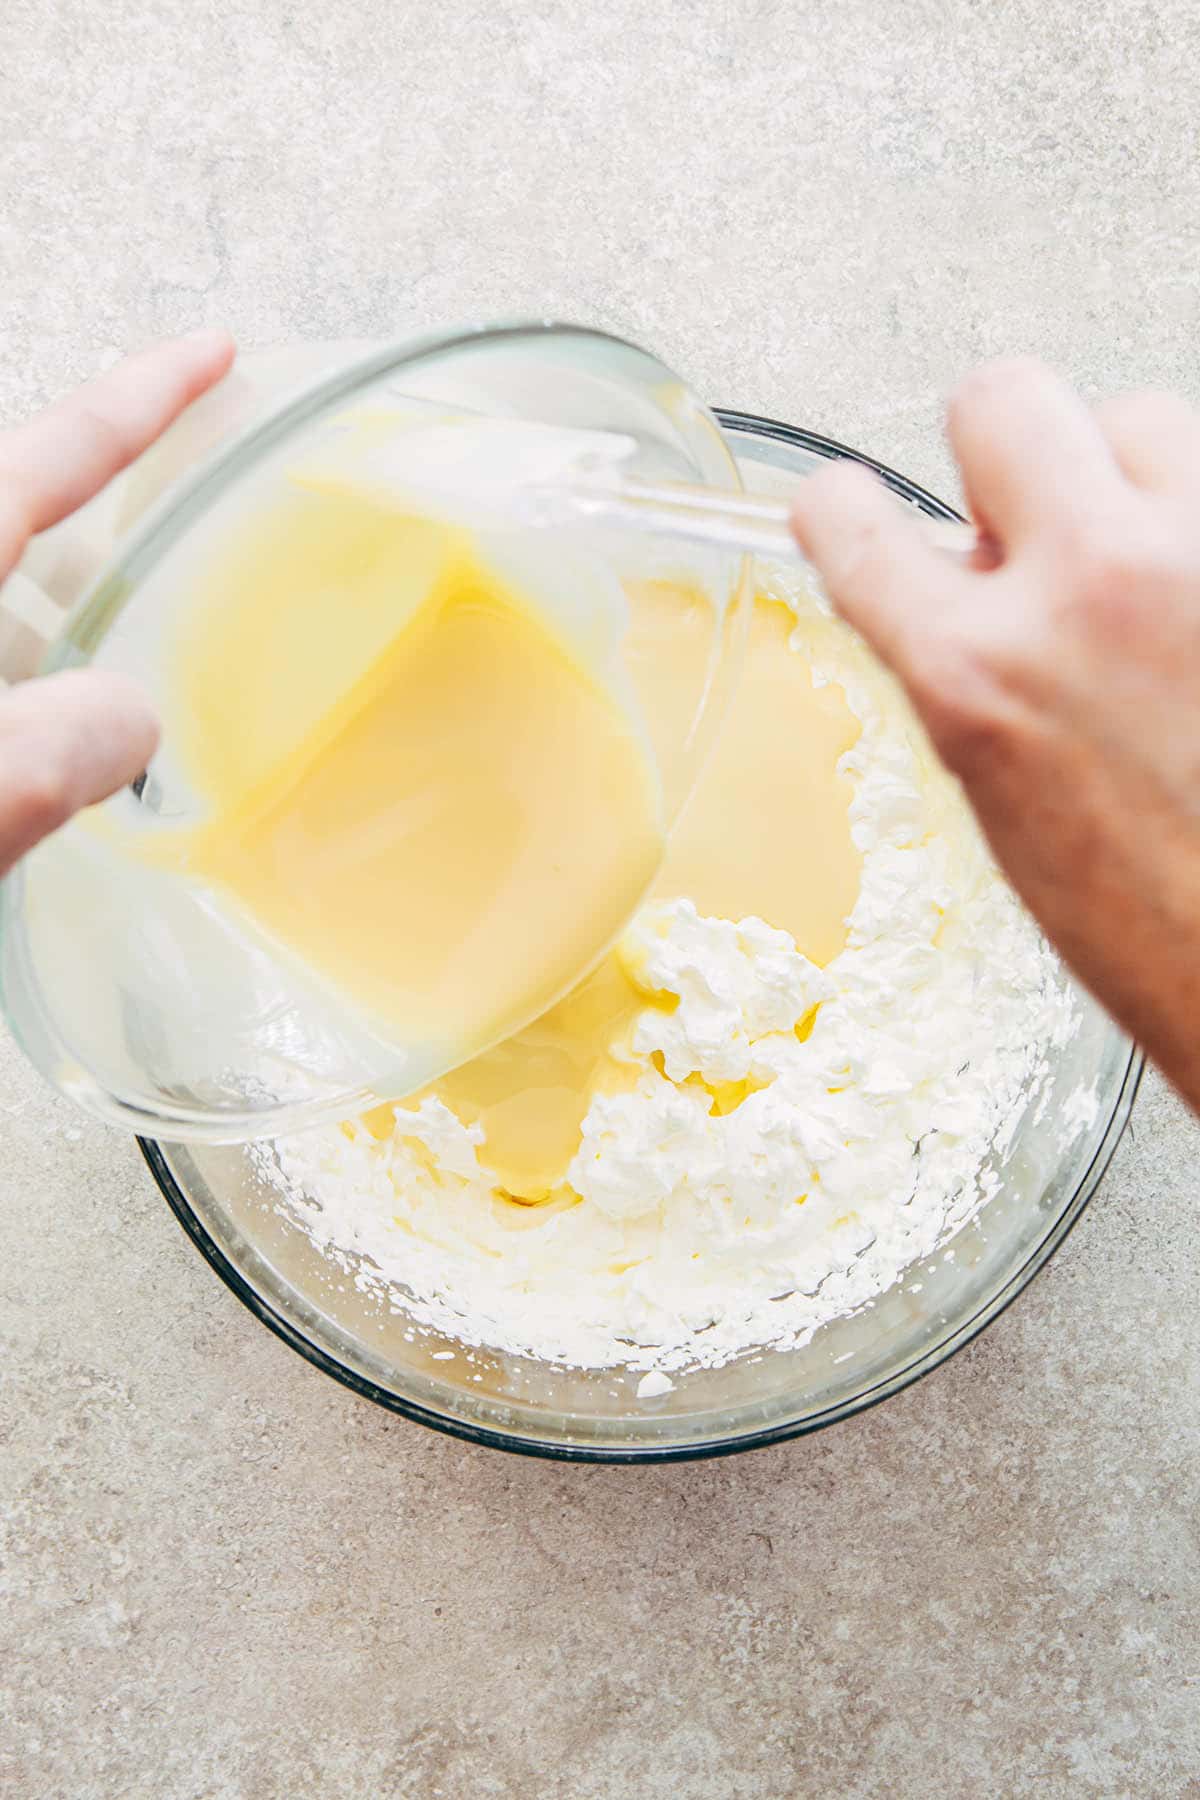 A hand using a rubber spatula to scrape condensed milk from a glass bowl into a bowl of whipped cream.